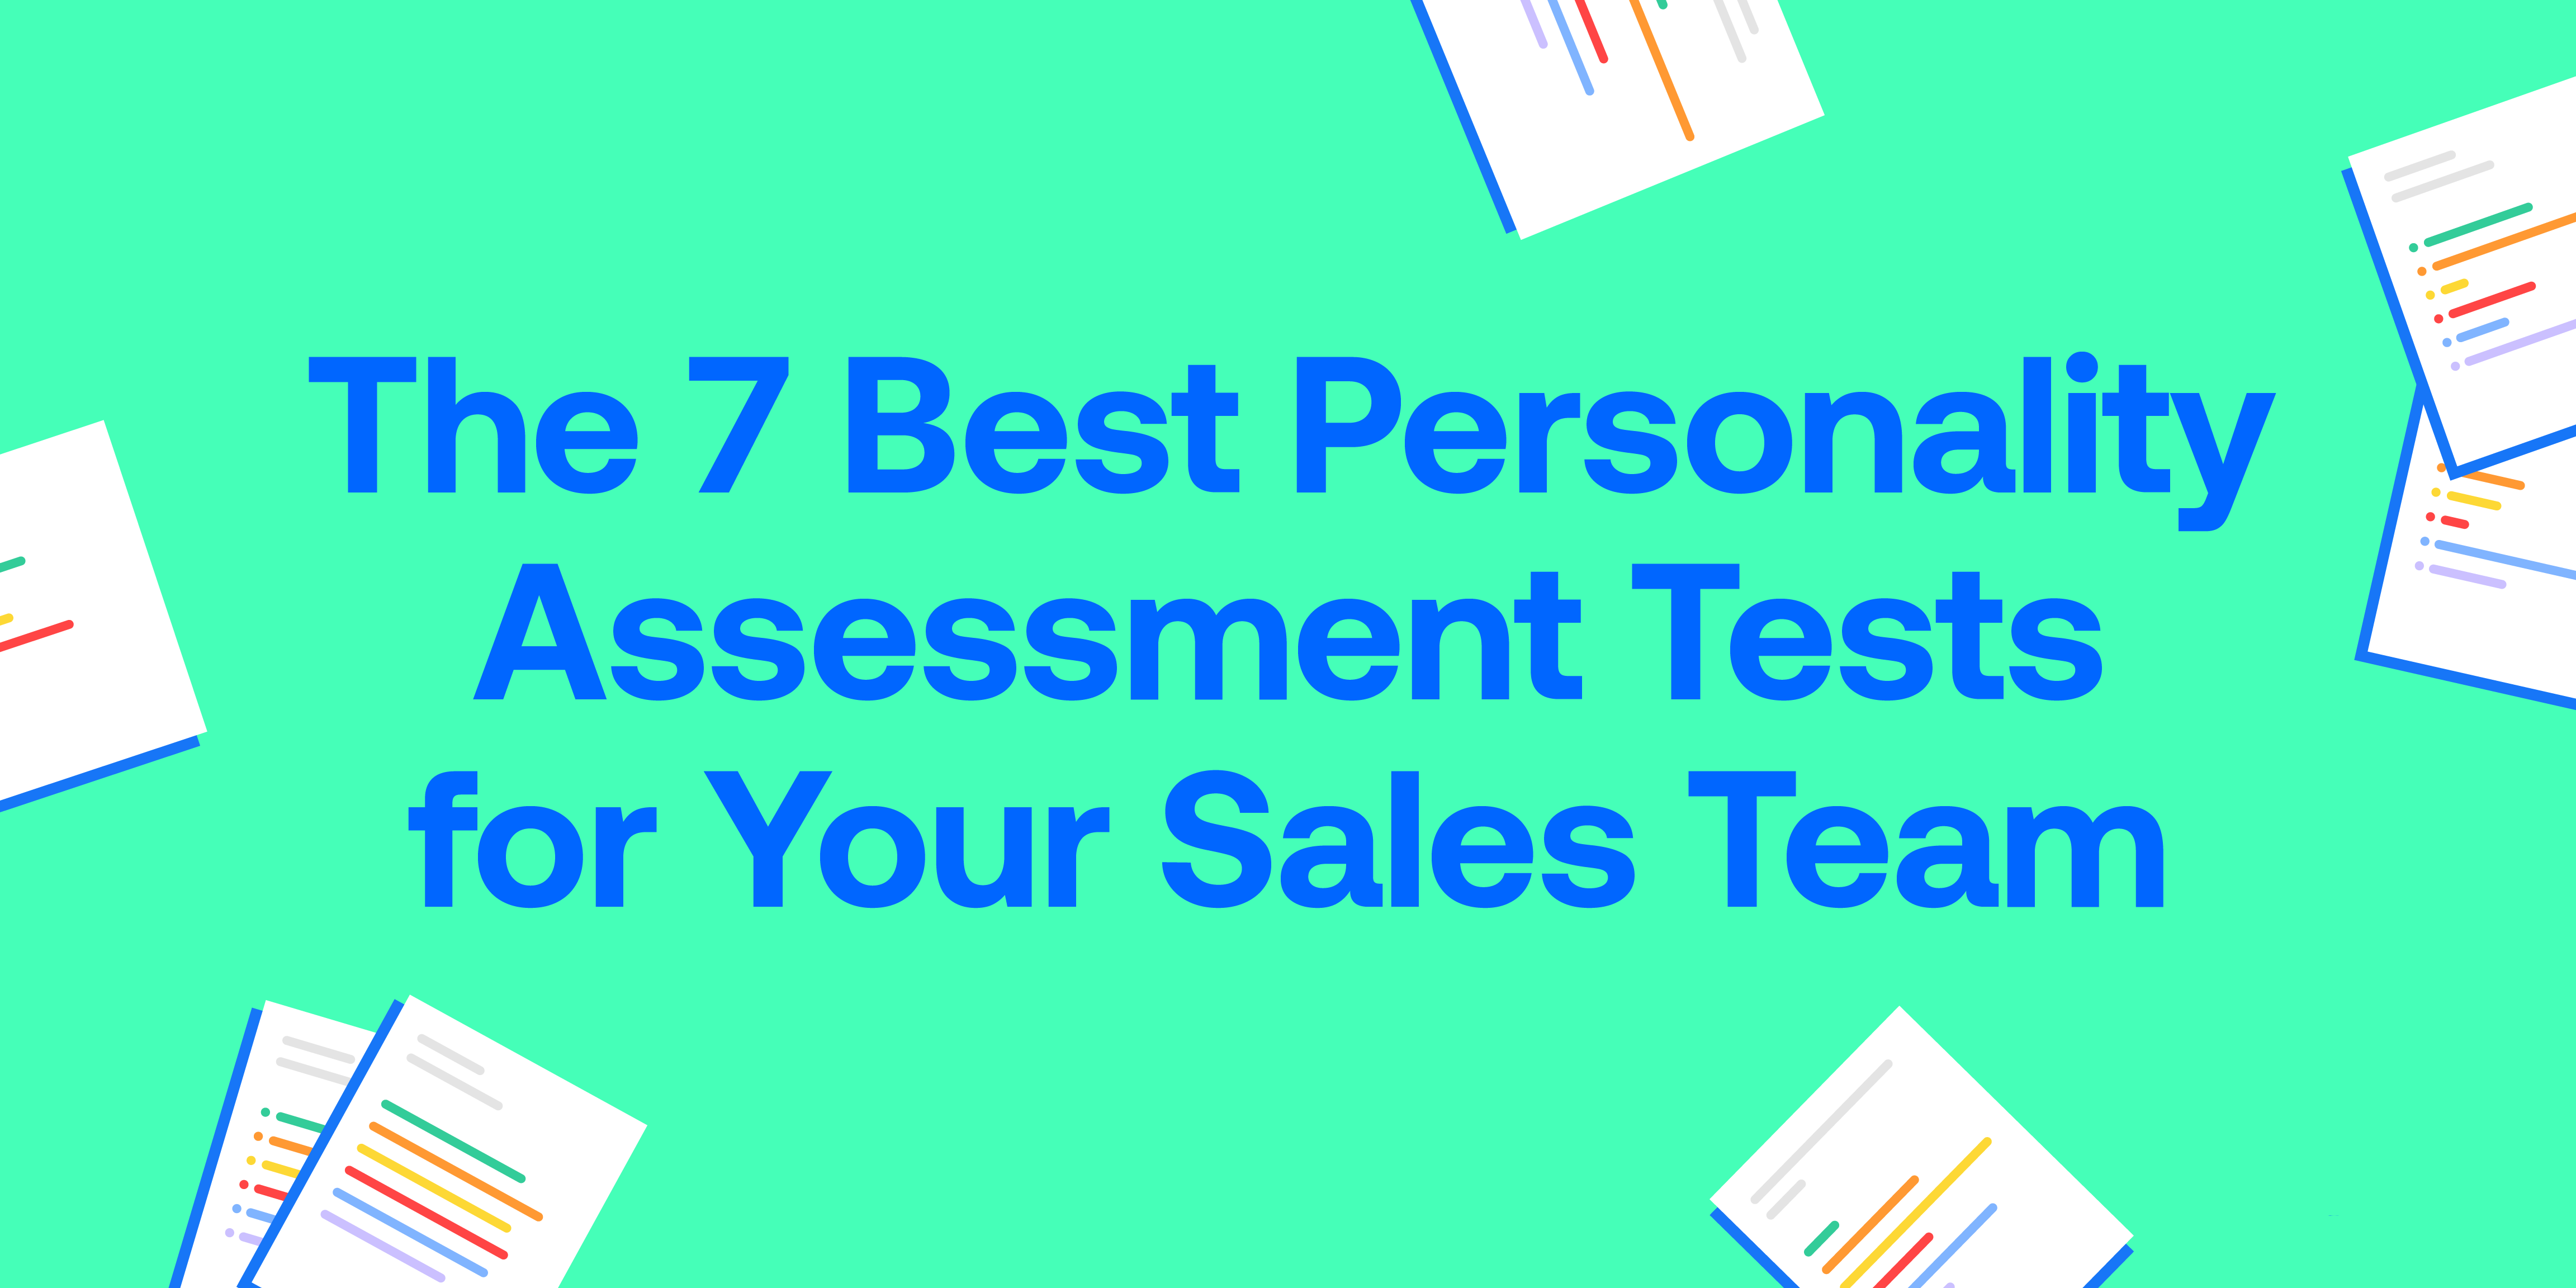 7 Top Sales Personality Assessment Tests For Recruiting The Best Talent